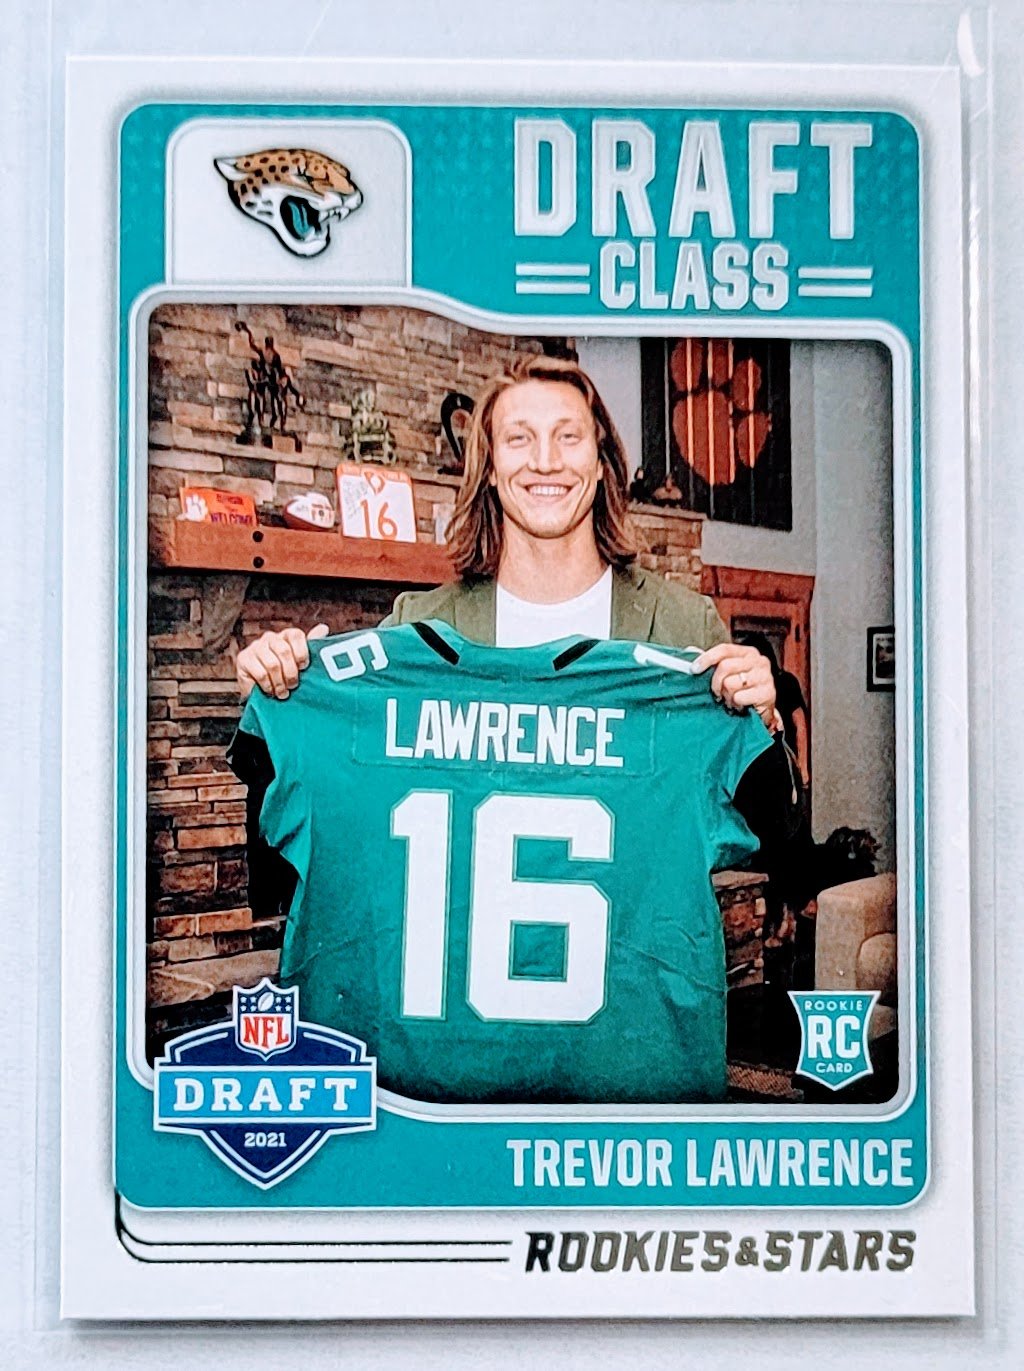 2021 Panini Rookies and Stars Trevor Lawrence Draft Class Rookie Football Card AVM1 simple Xclusive Collectibles   